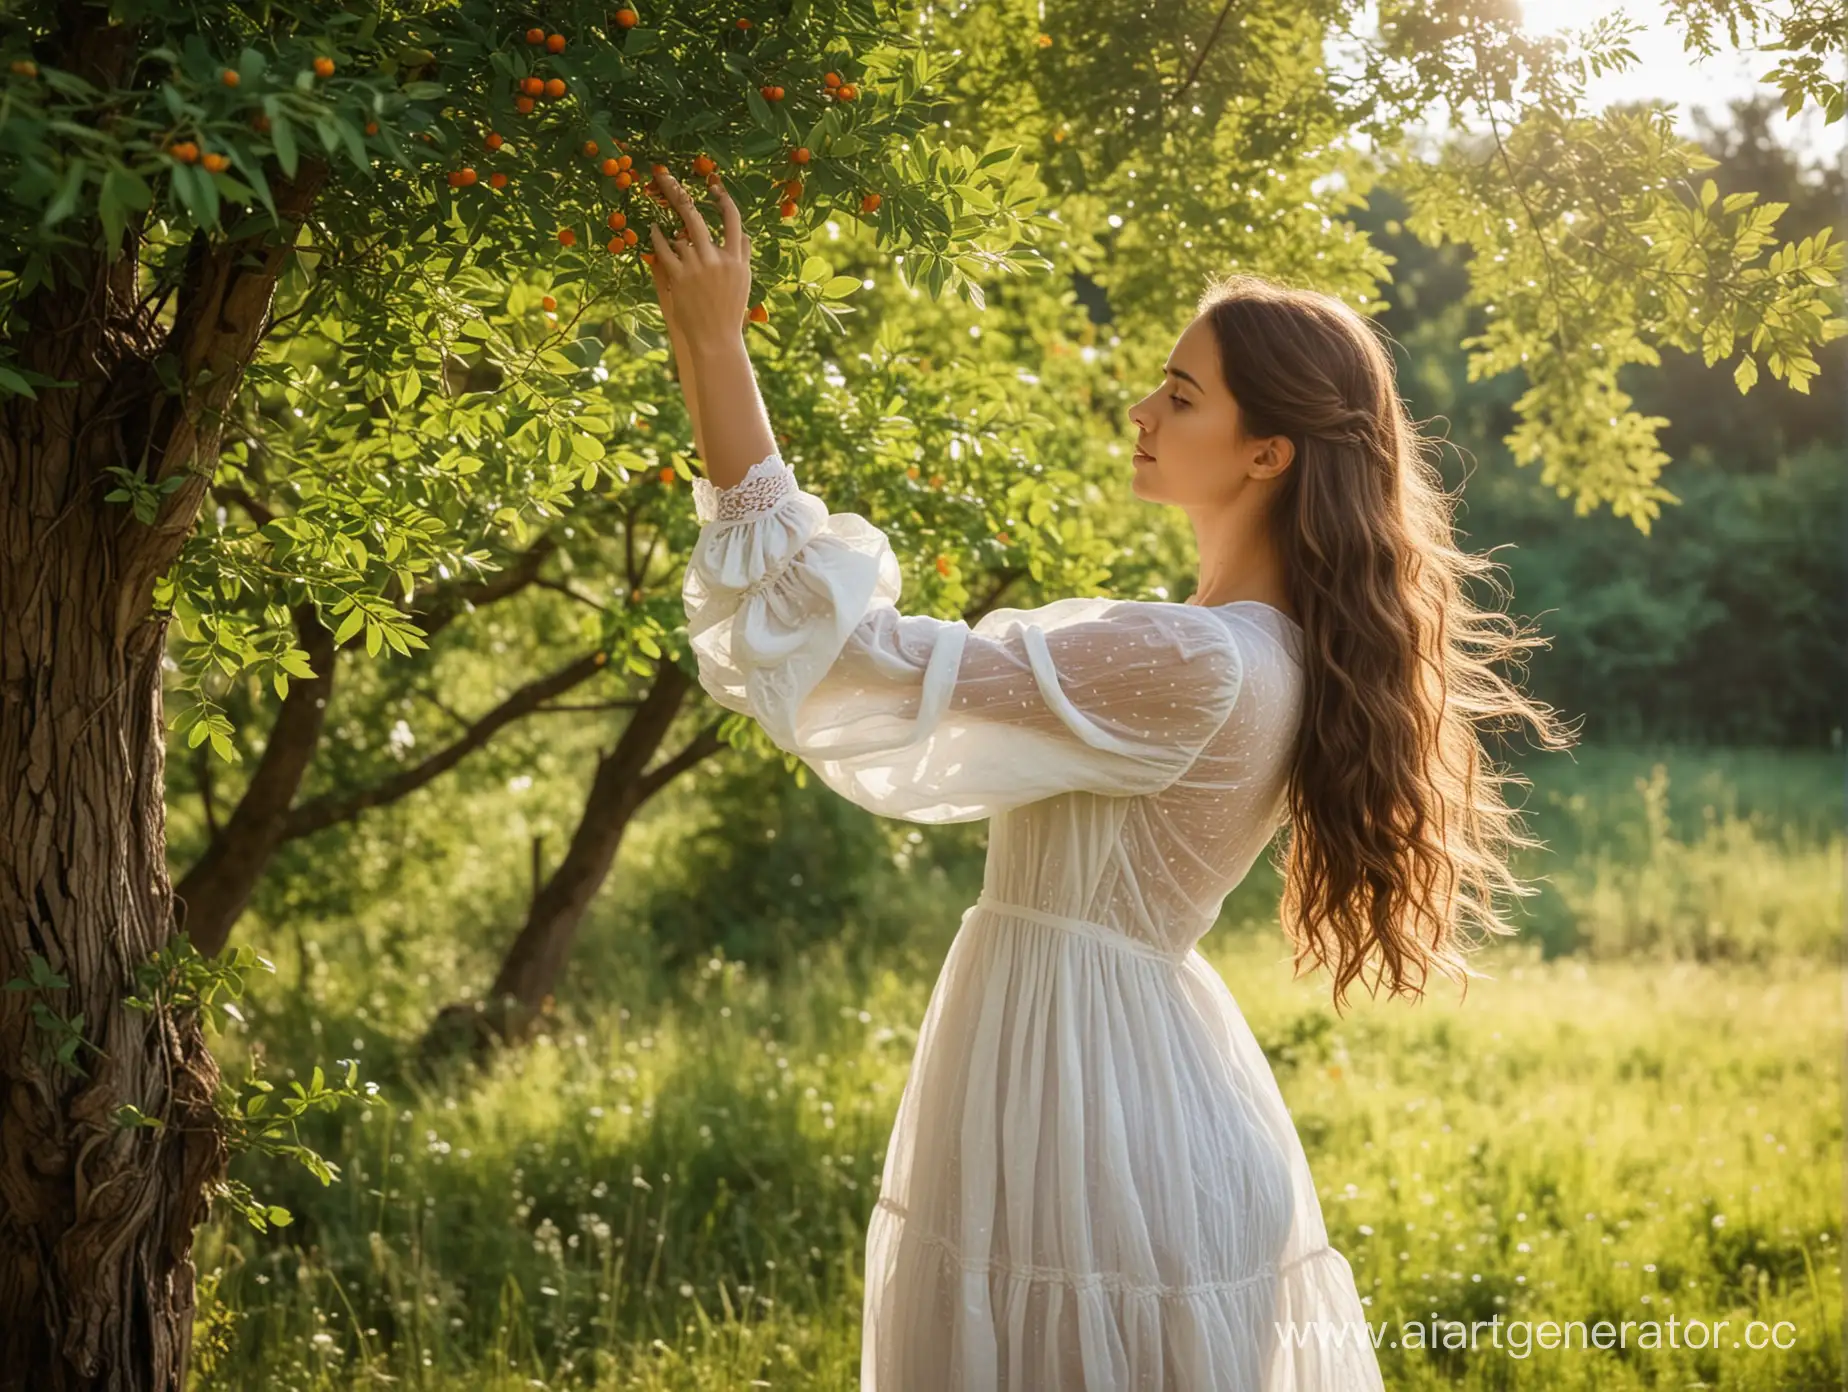 Young-Woman-in-White-Dress-Engages-with-Rowan-Tree-Leaves